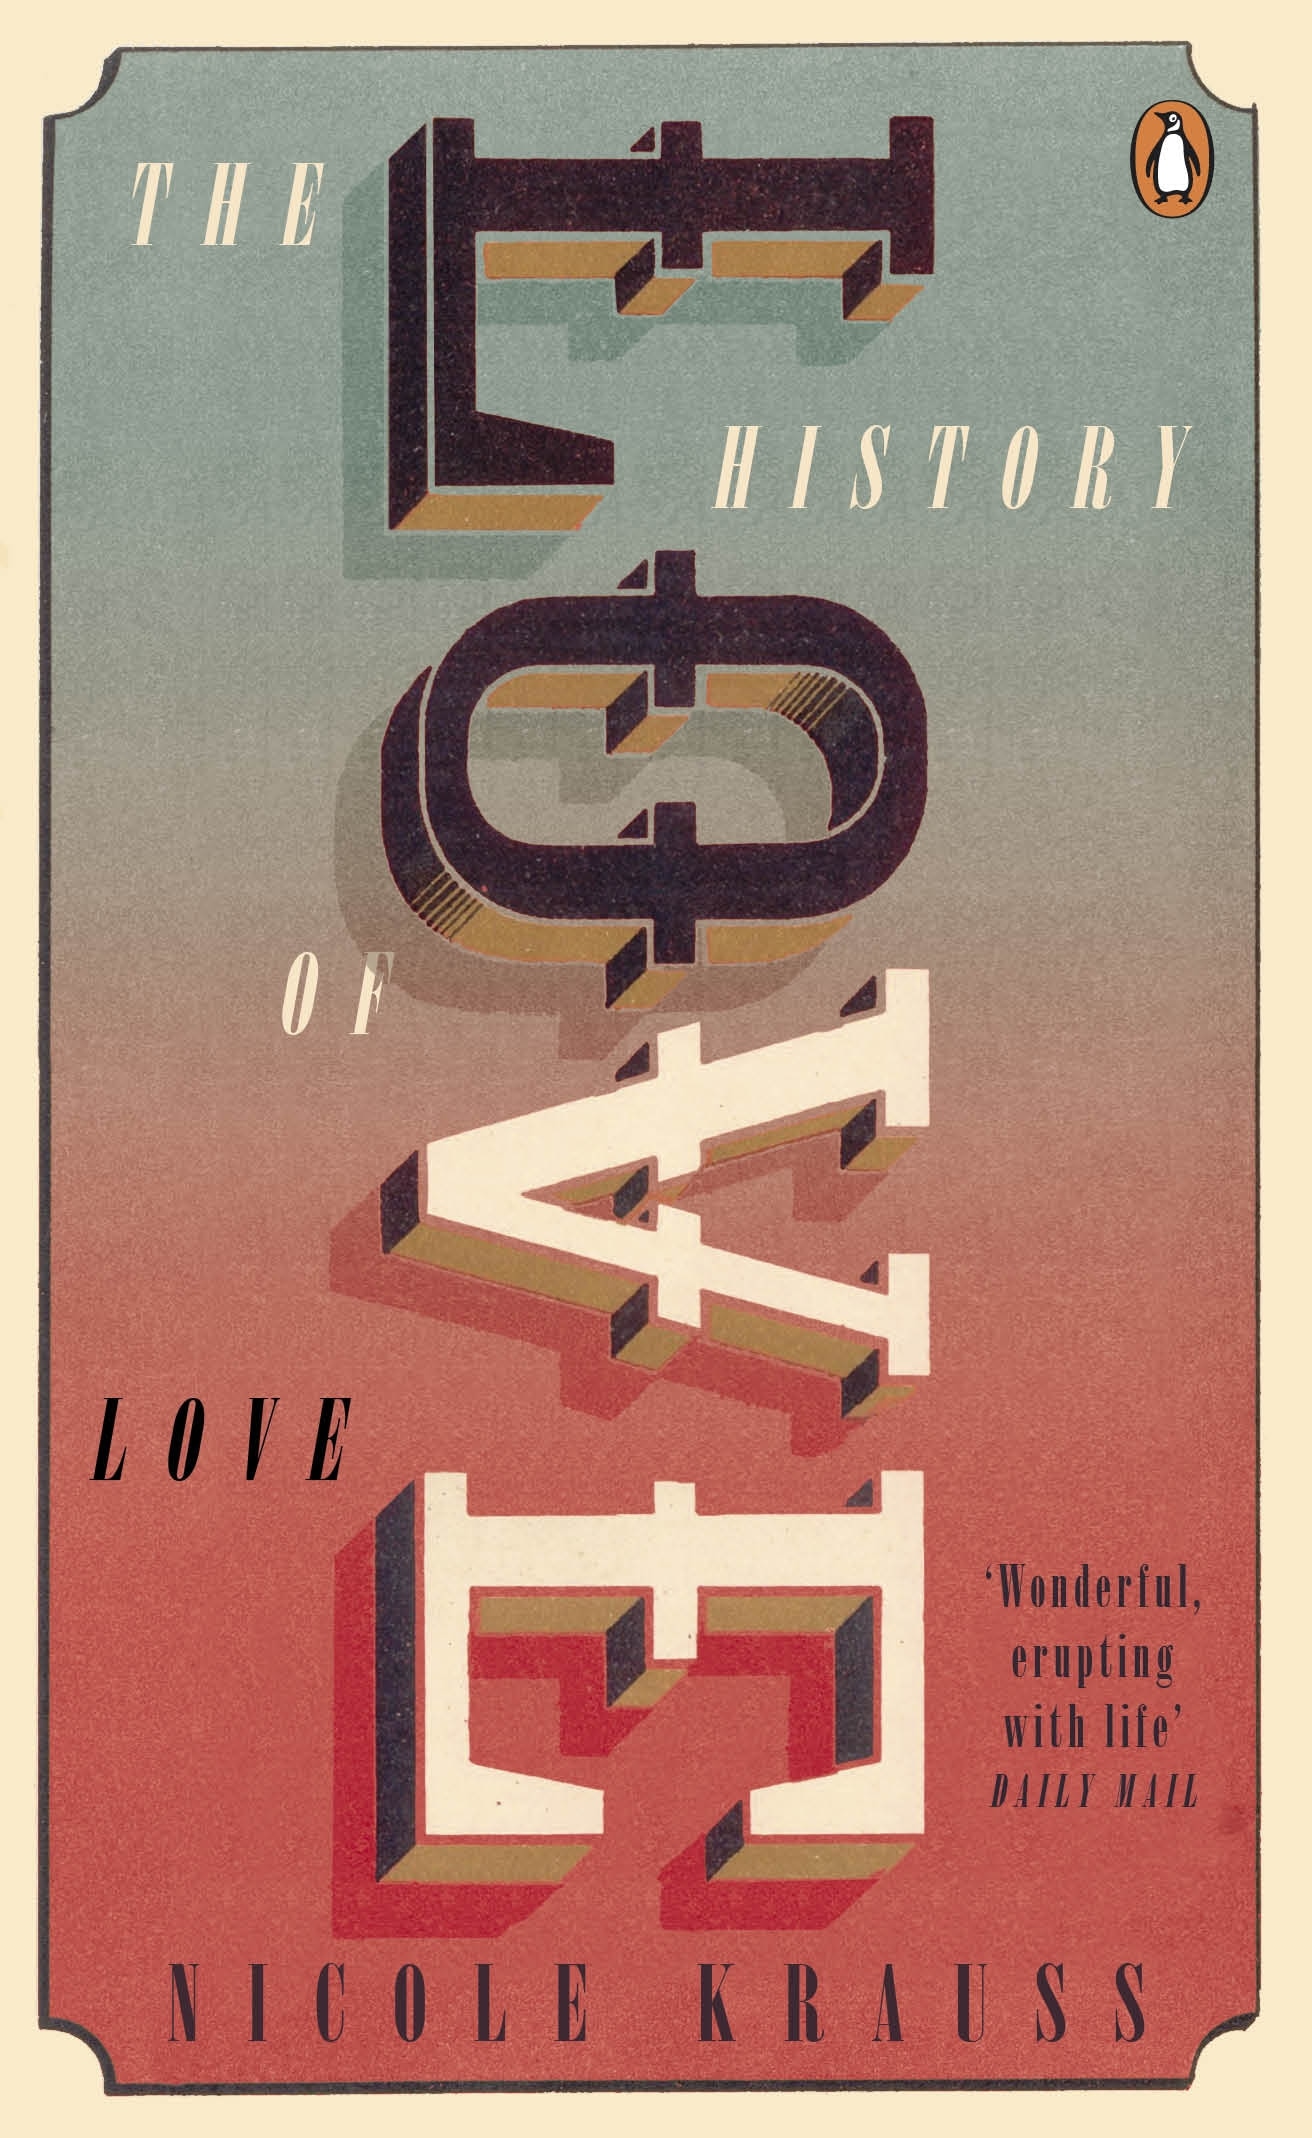 Book “The History of Love” by Nicole Krauss — August 6, 2015